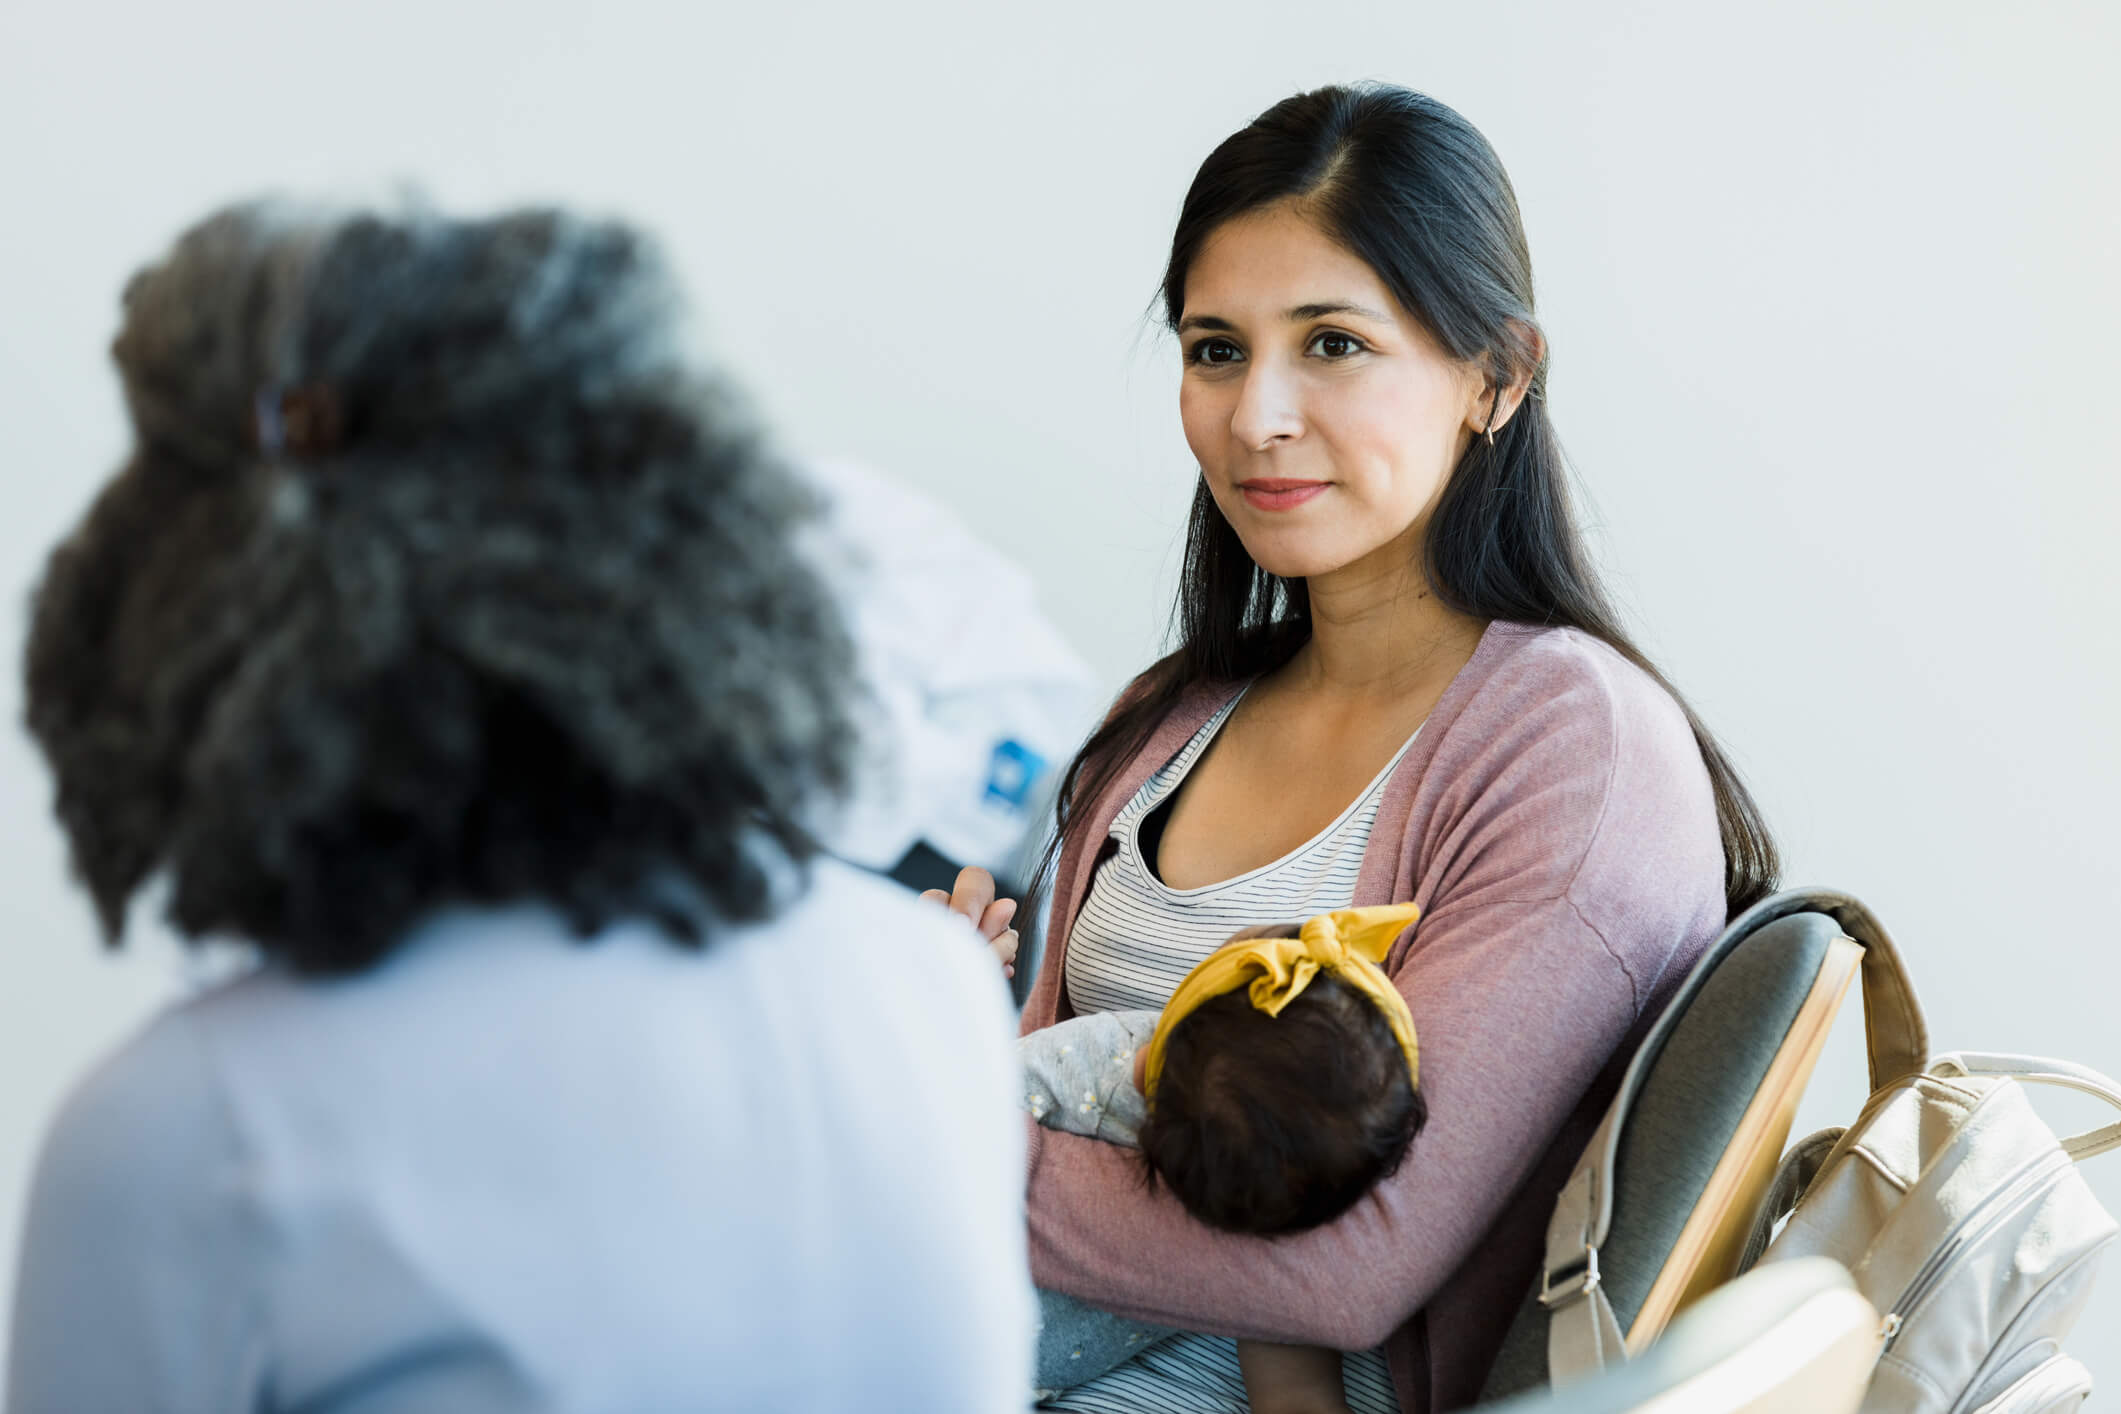 Woman holding a baby wearing a yellow bow talking to a healthcare provider.